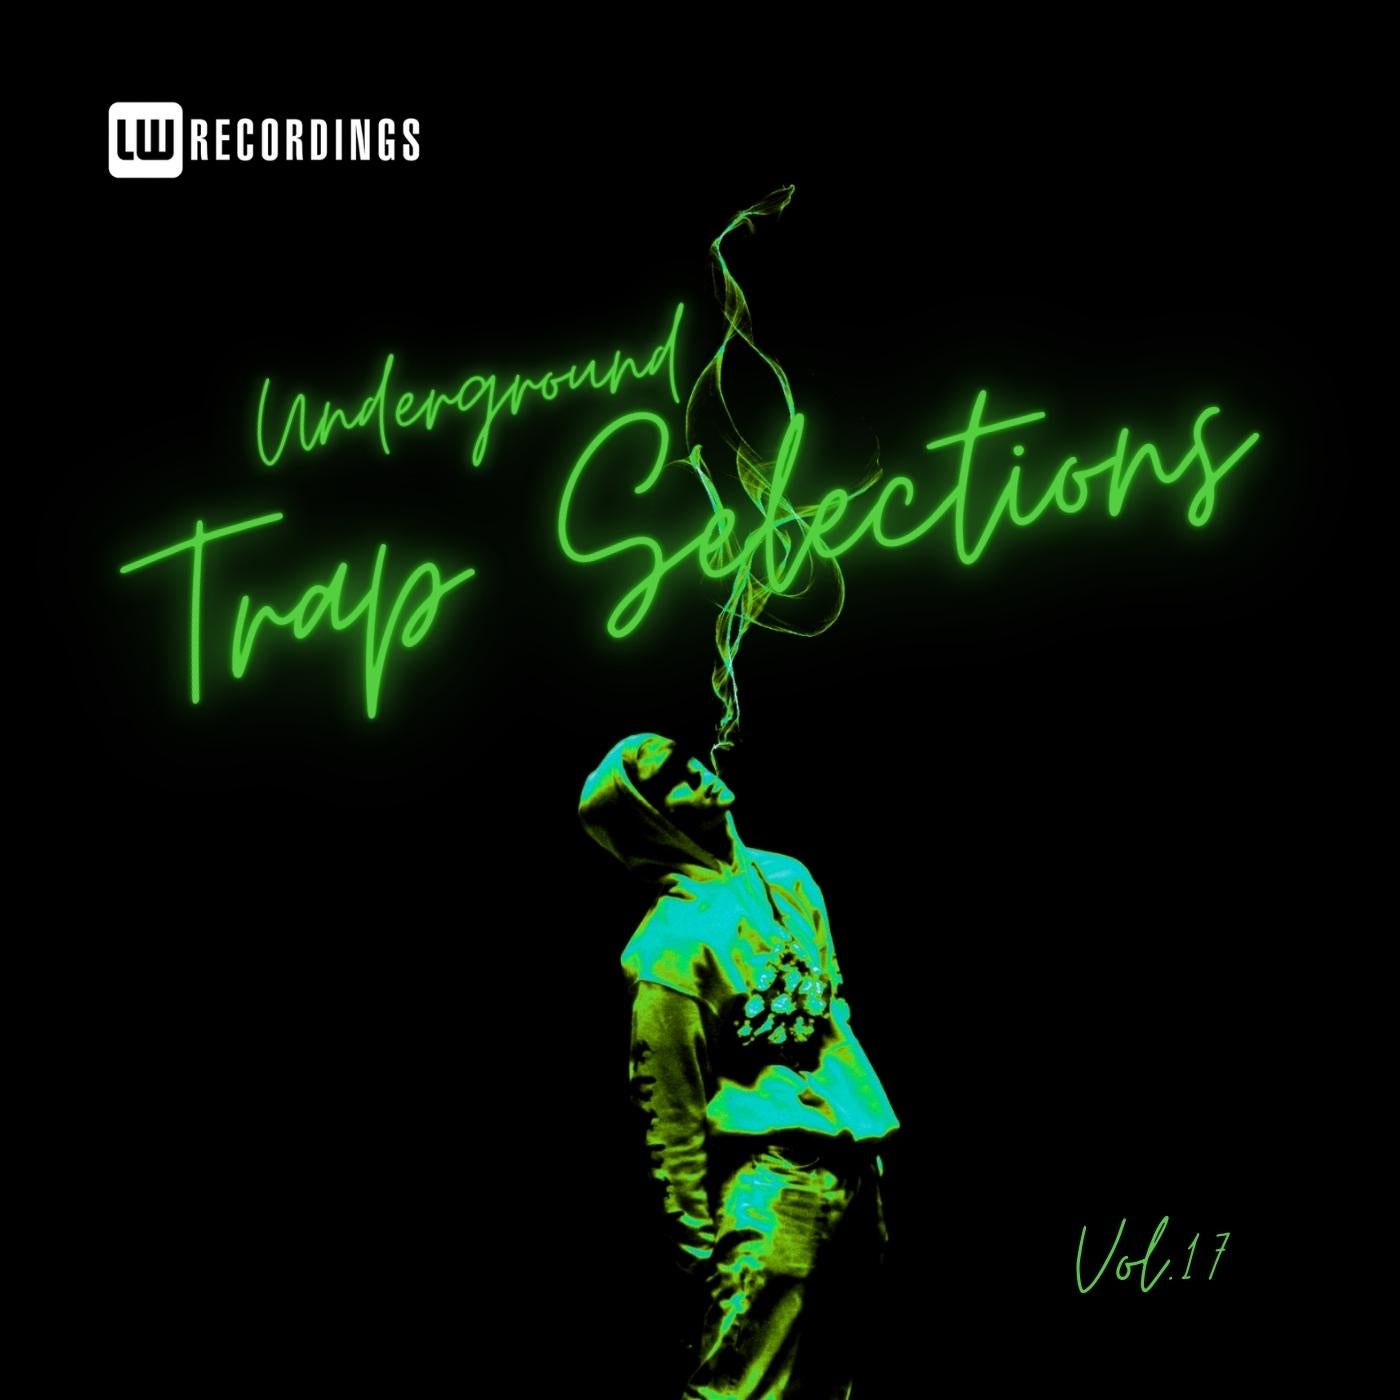 Underground Trap Selections, Vol. 17